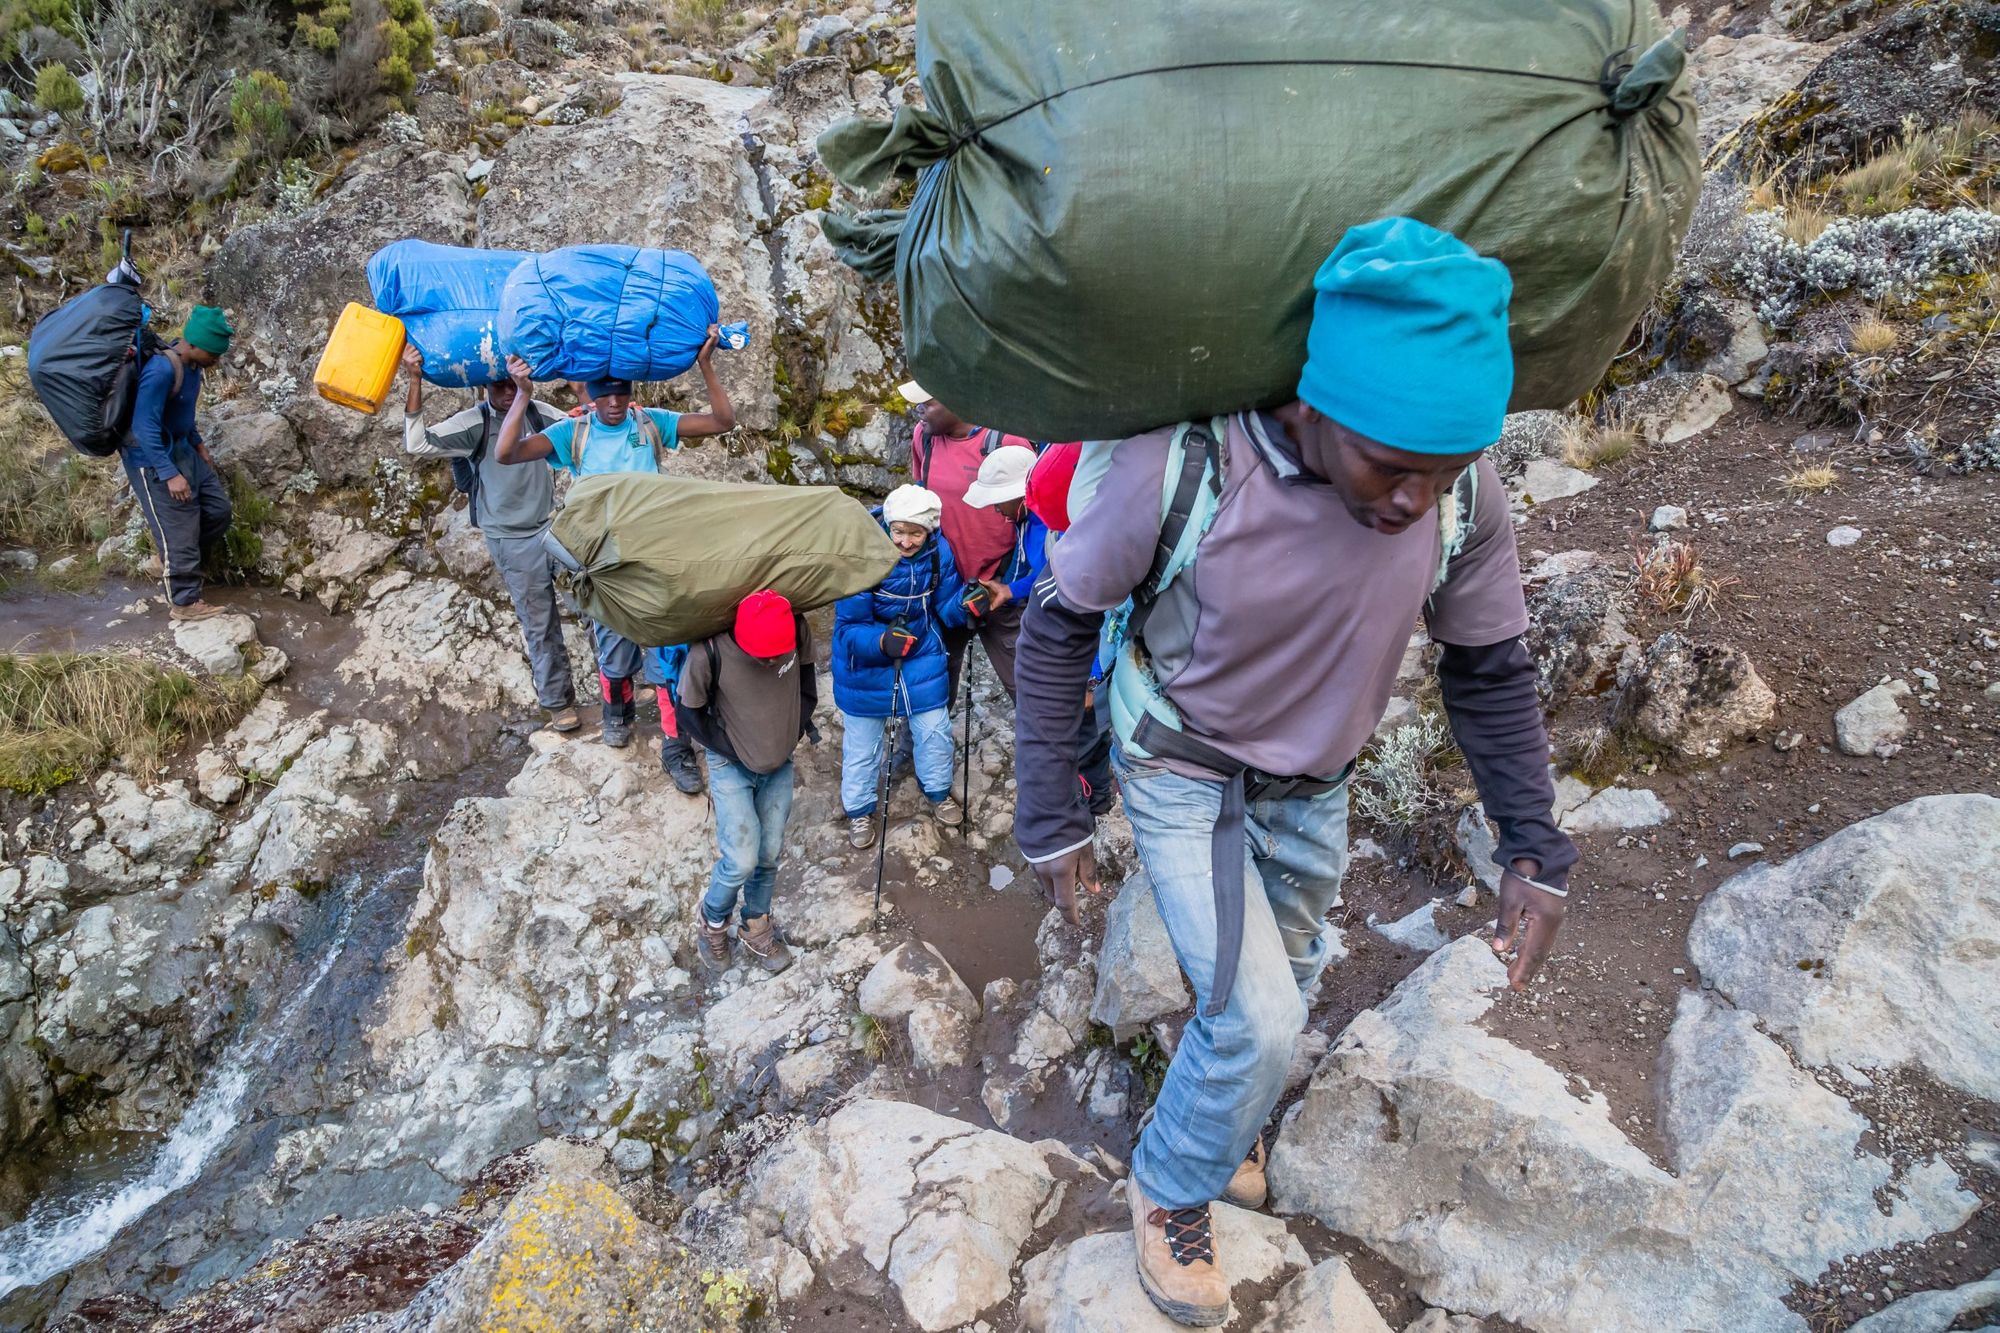 Porters burdened with heavy packs as they climb Mount Kilimanjaro.